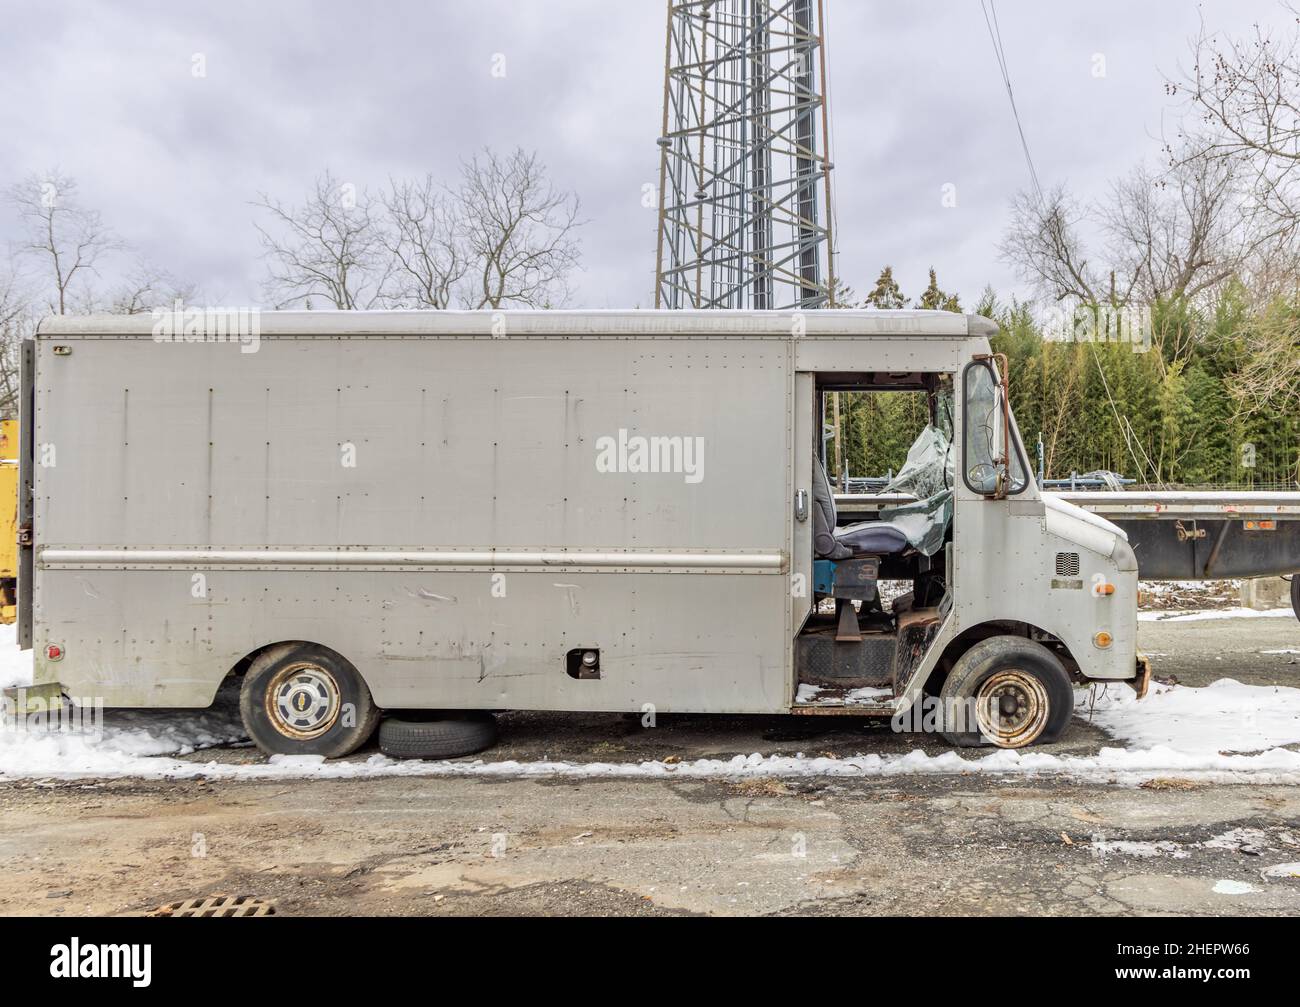 Abandoned box truck on a cold winter day Stock Photo